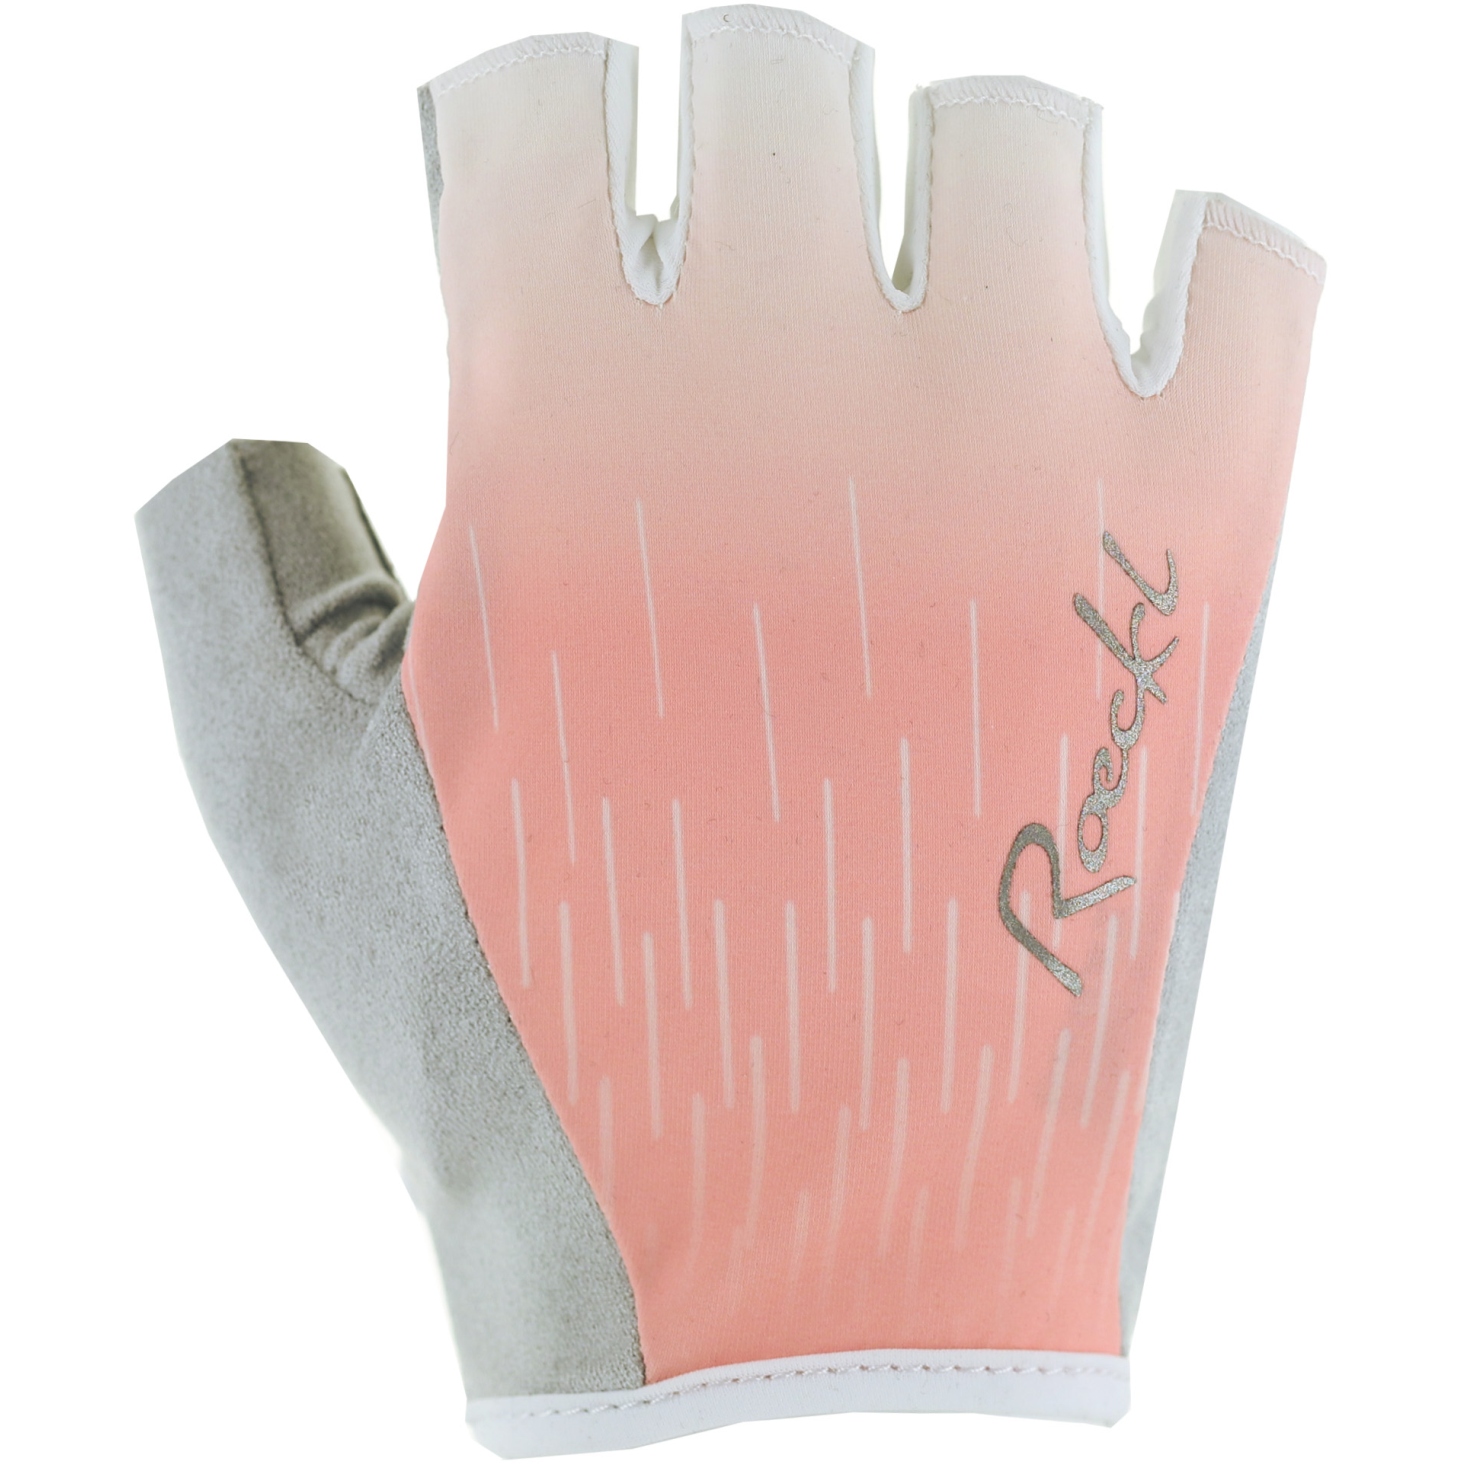 Picture of Roeckl Sports Darvella Cycling Gloves Women - salmon 2560